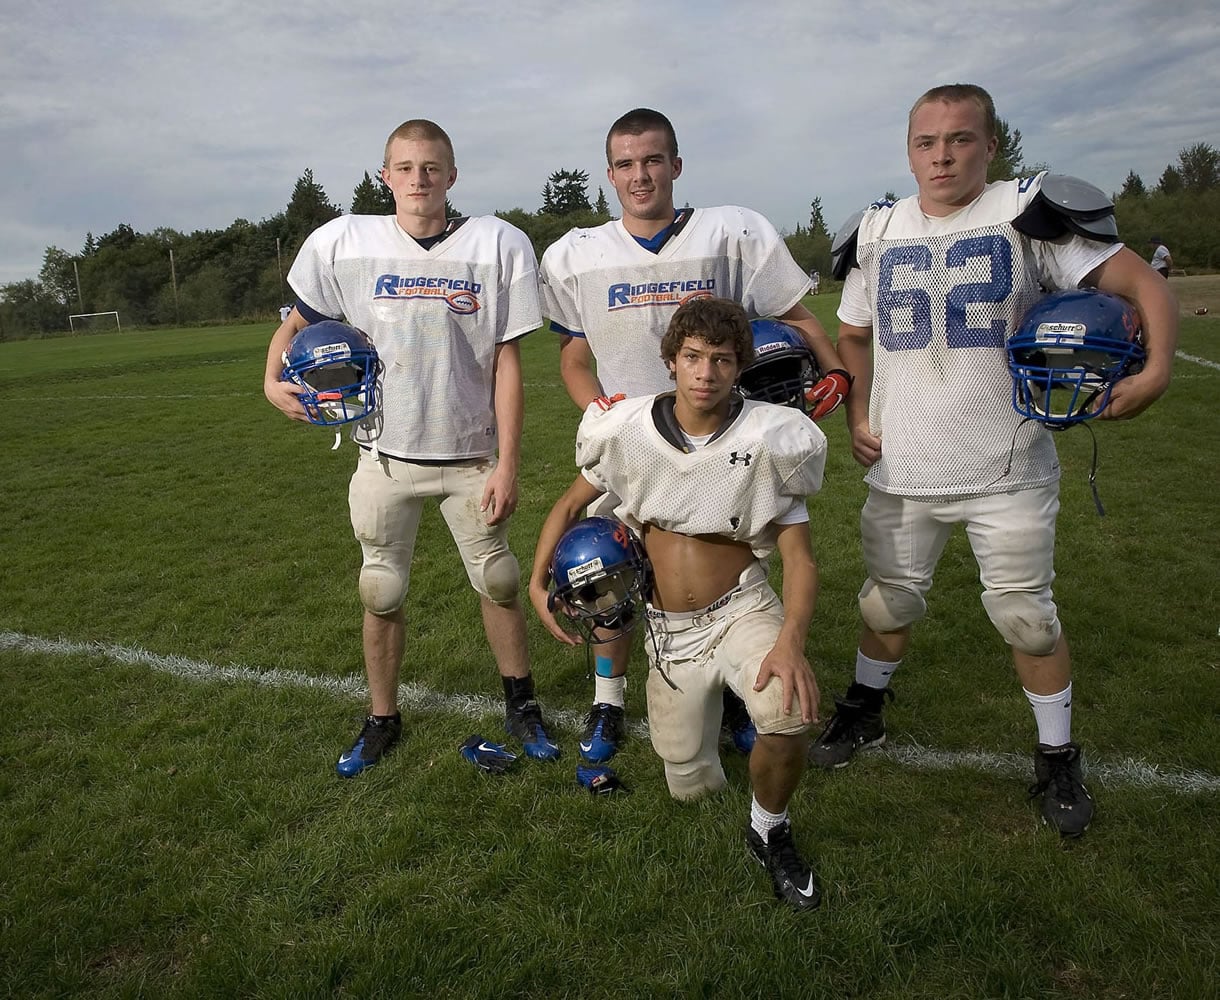 Ridgefield standouts (from back left) Clayton Farr, Ian Williams, Tyson Wright and Michael Knox (kneeling).